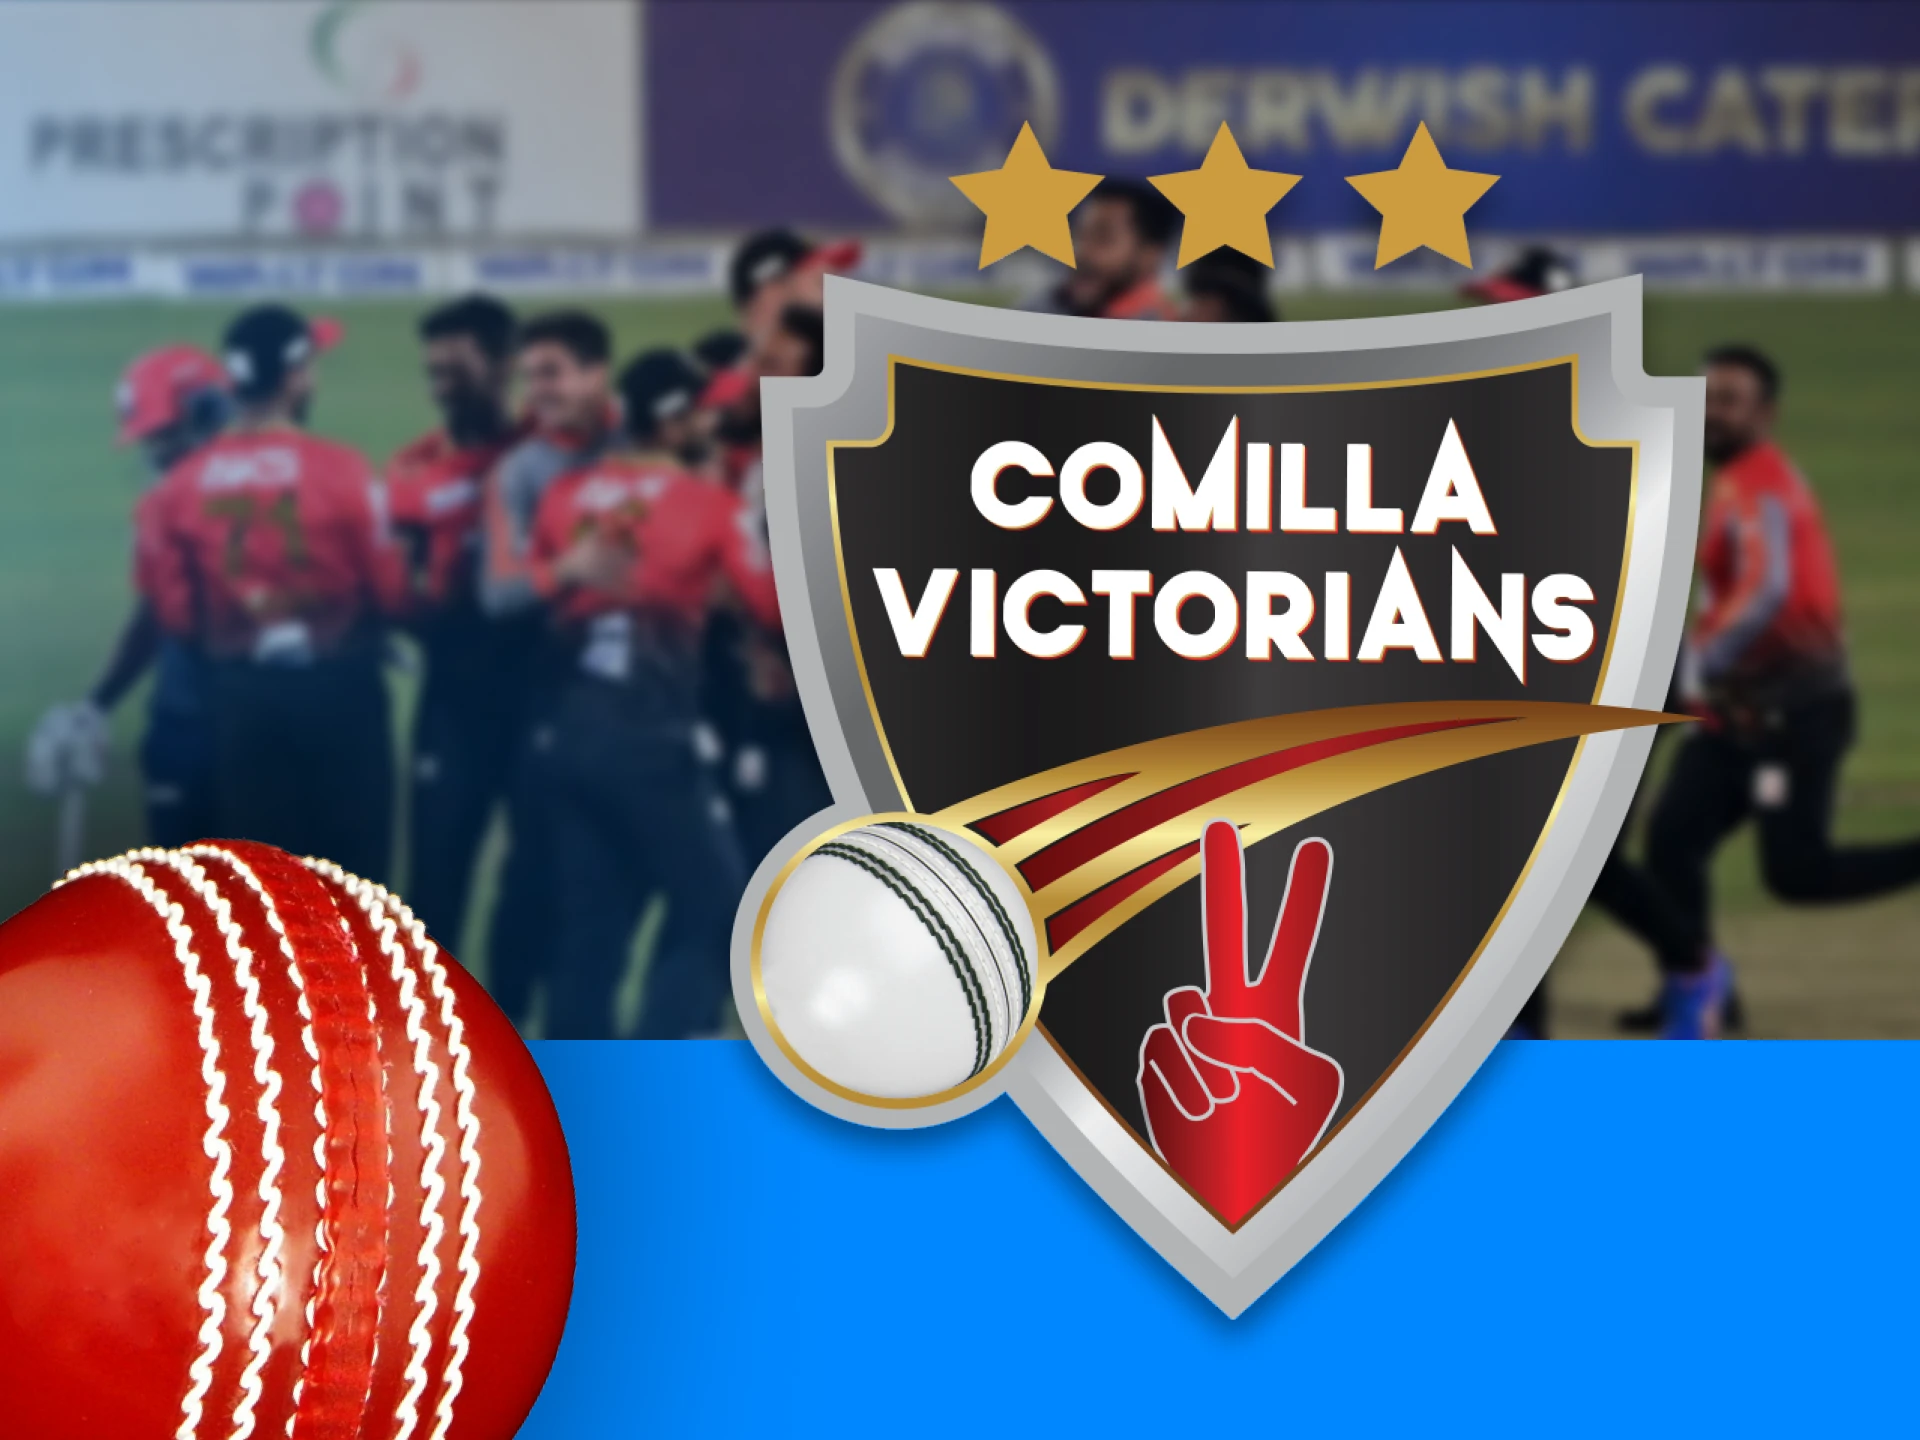 One of the best BPL teams, Comilla Victorians, comes to the tournament from Comilla.